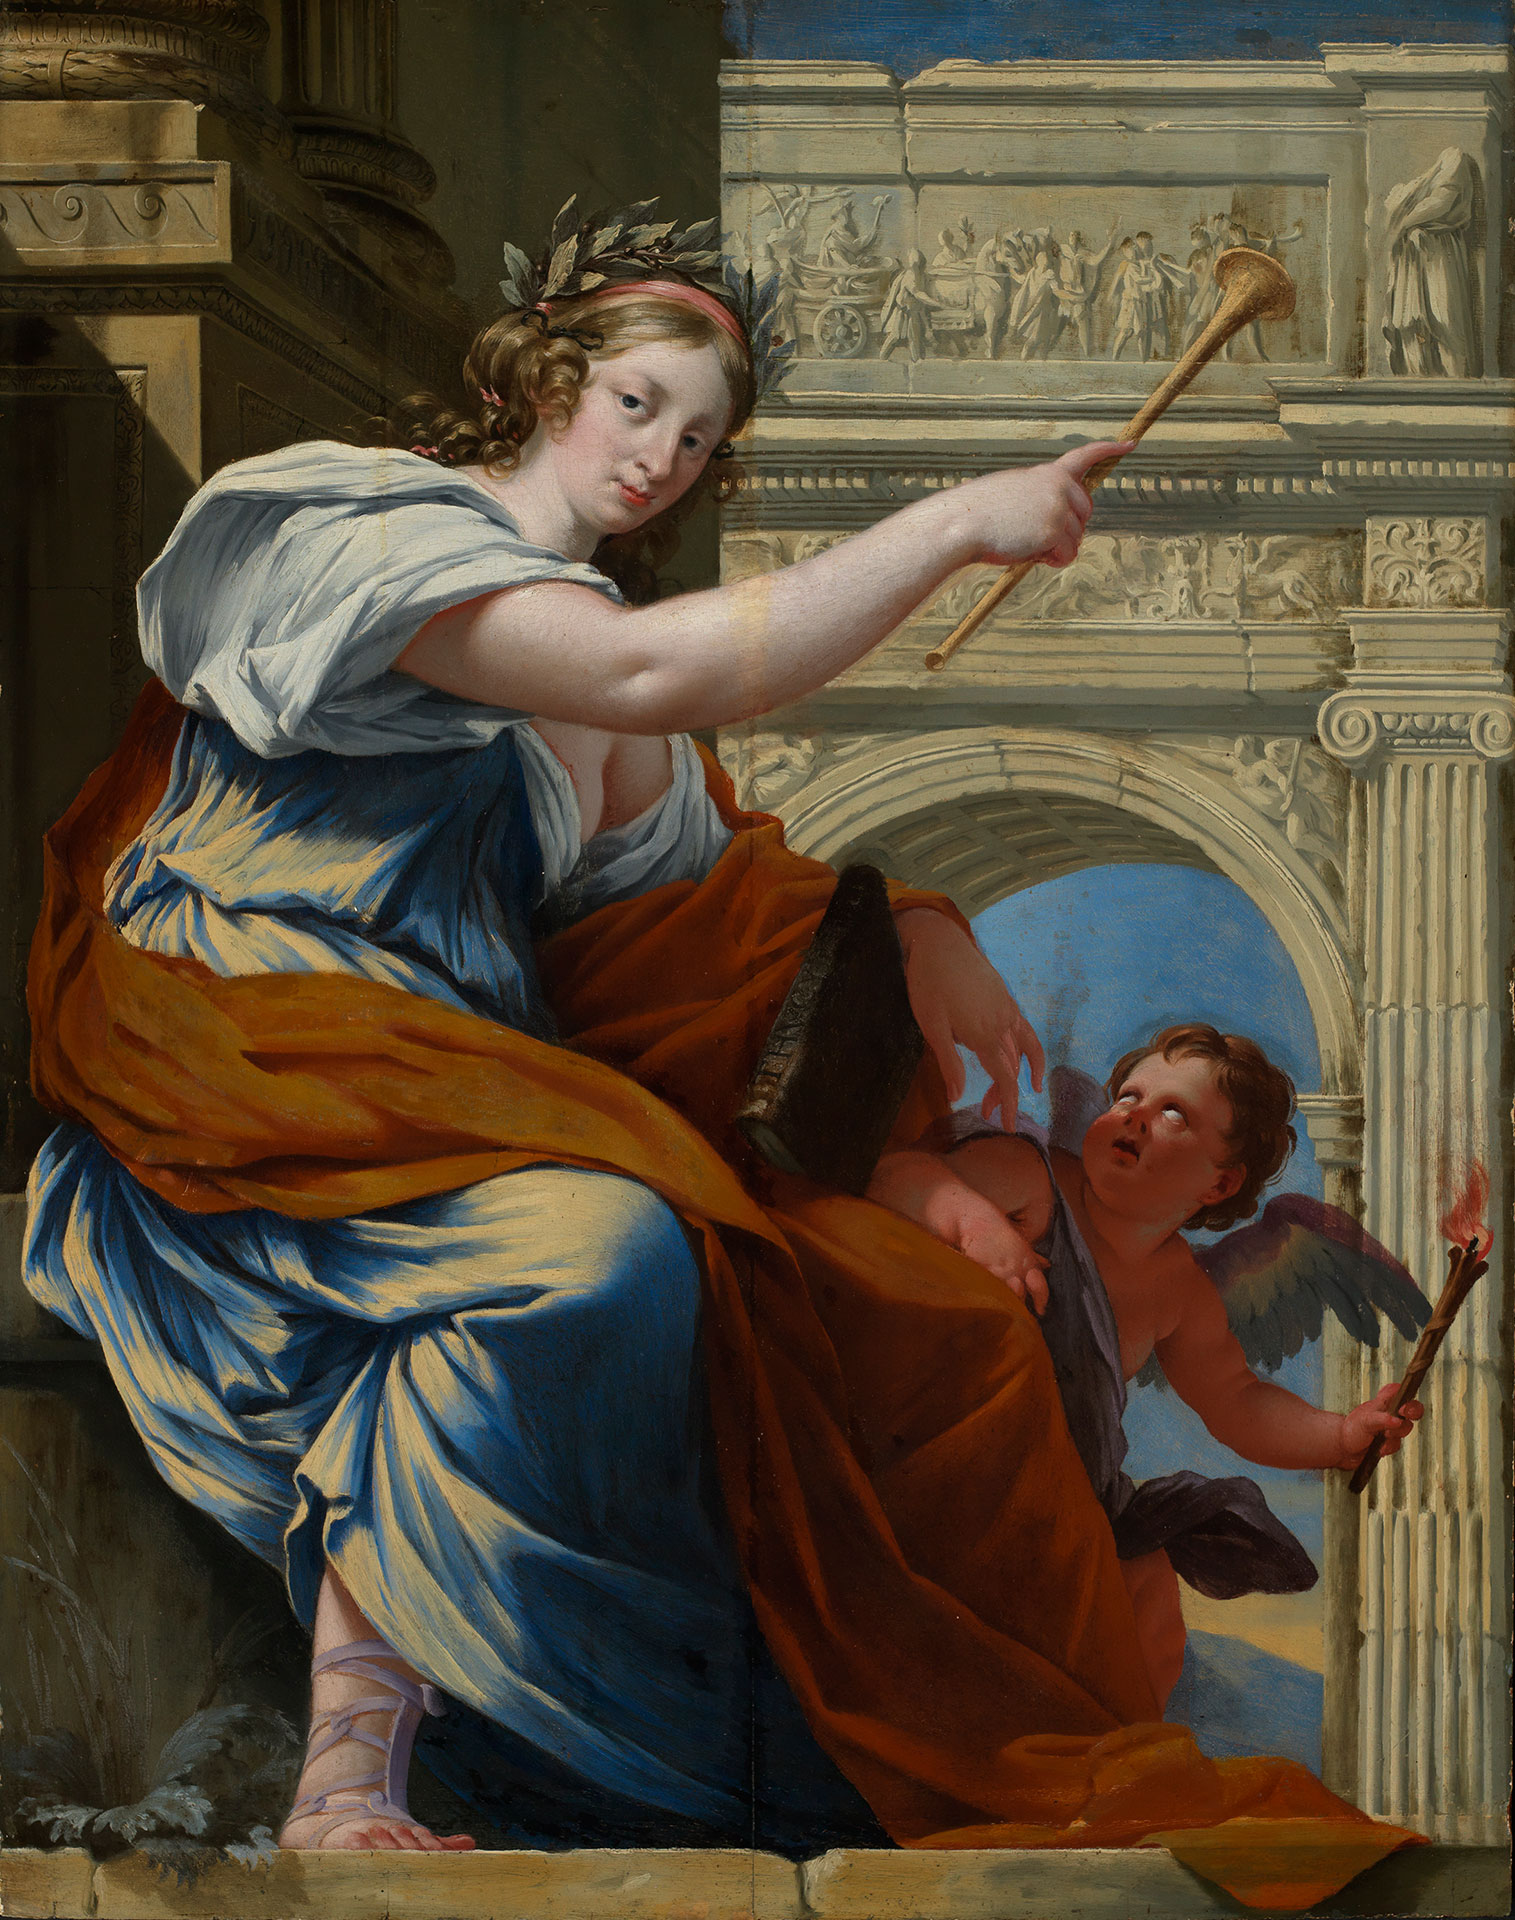 Illustration of the work "The Muse Klio" by Simon Vouet. A woman sits in front of a triumphal arch and holds up a trumpet. The work of art is located in the Staatliche Kunsthalle Karlsruhe.